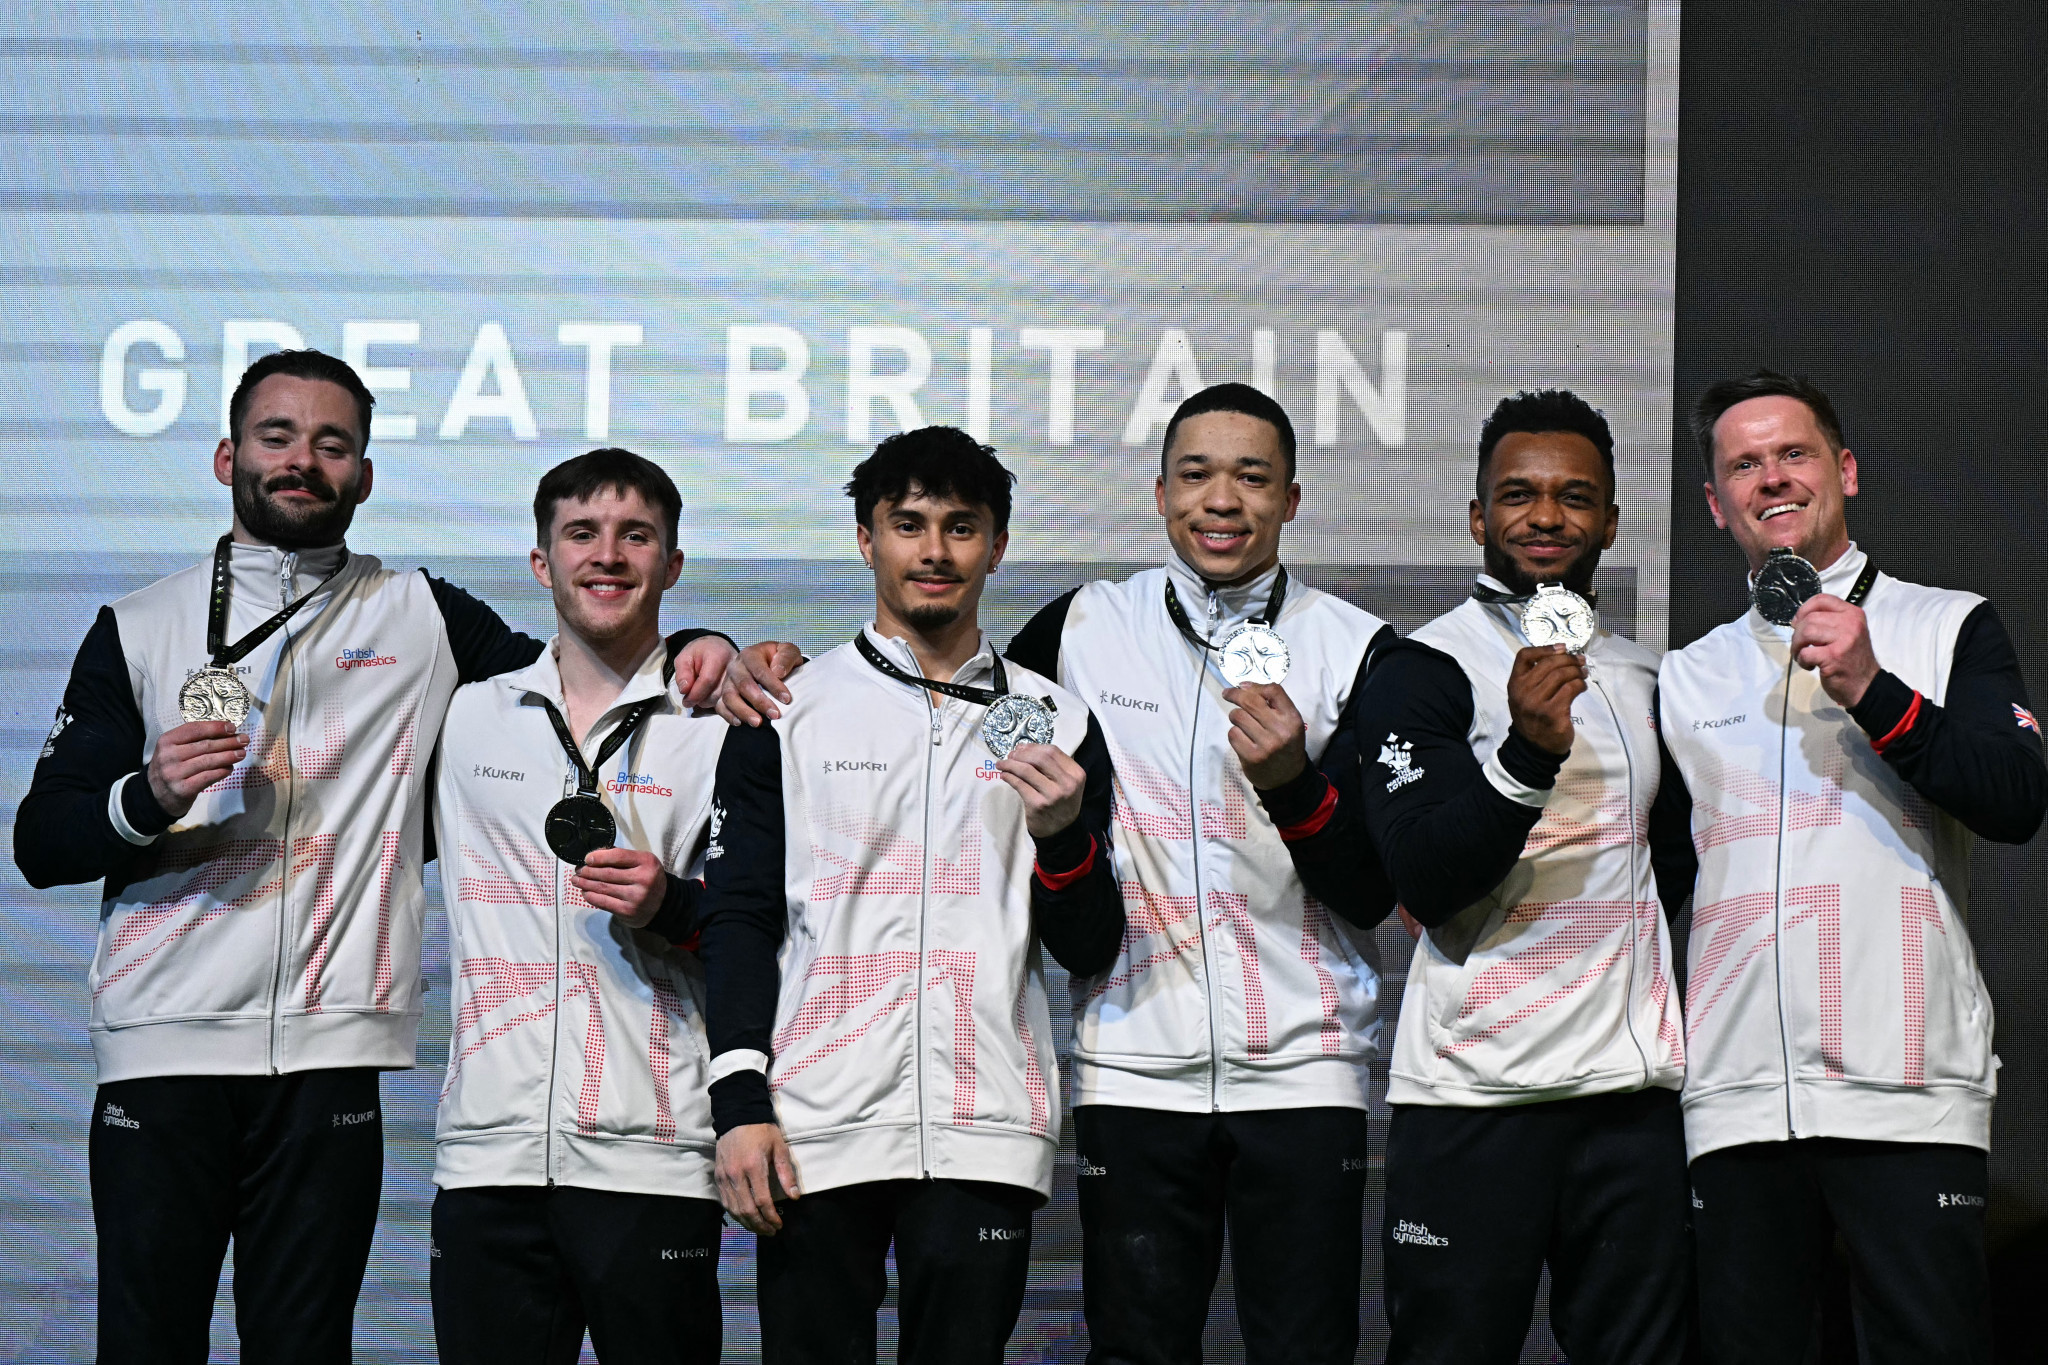 Great Britain had to settle for silver at the men's European gymnastics in Rimini, Italy. GETTY IMAGES